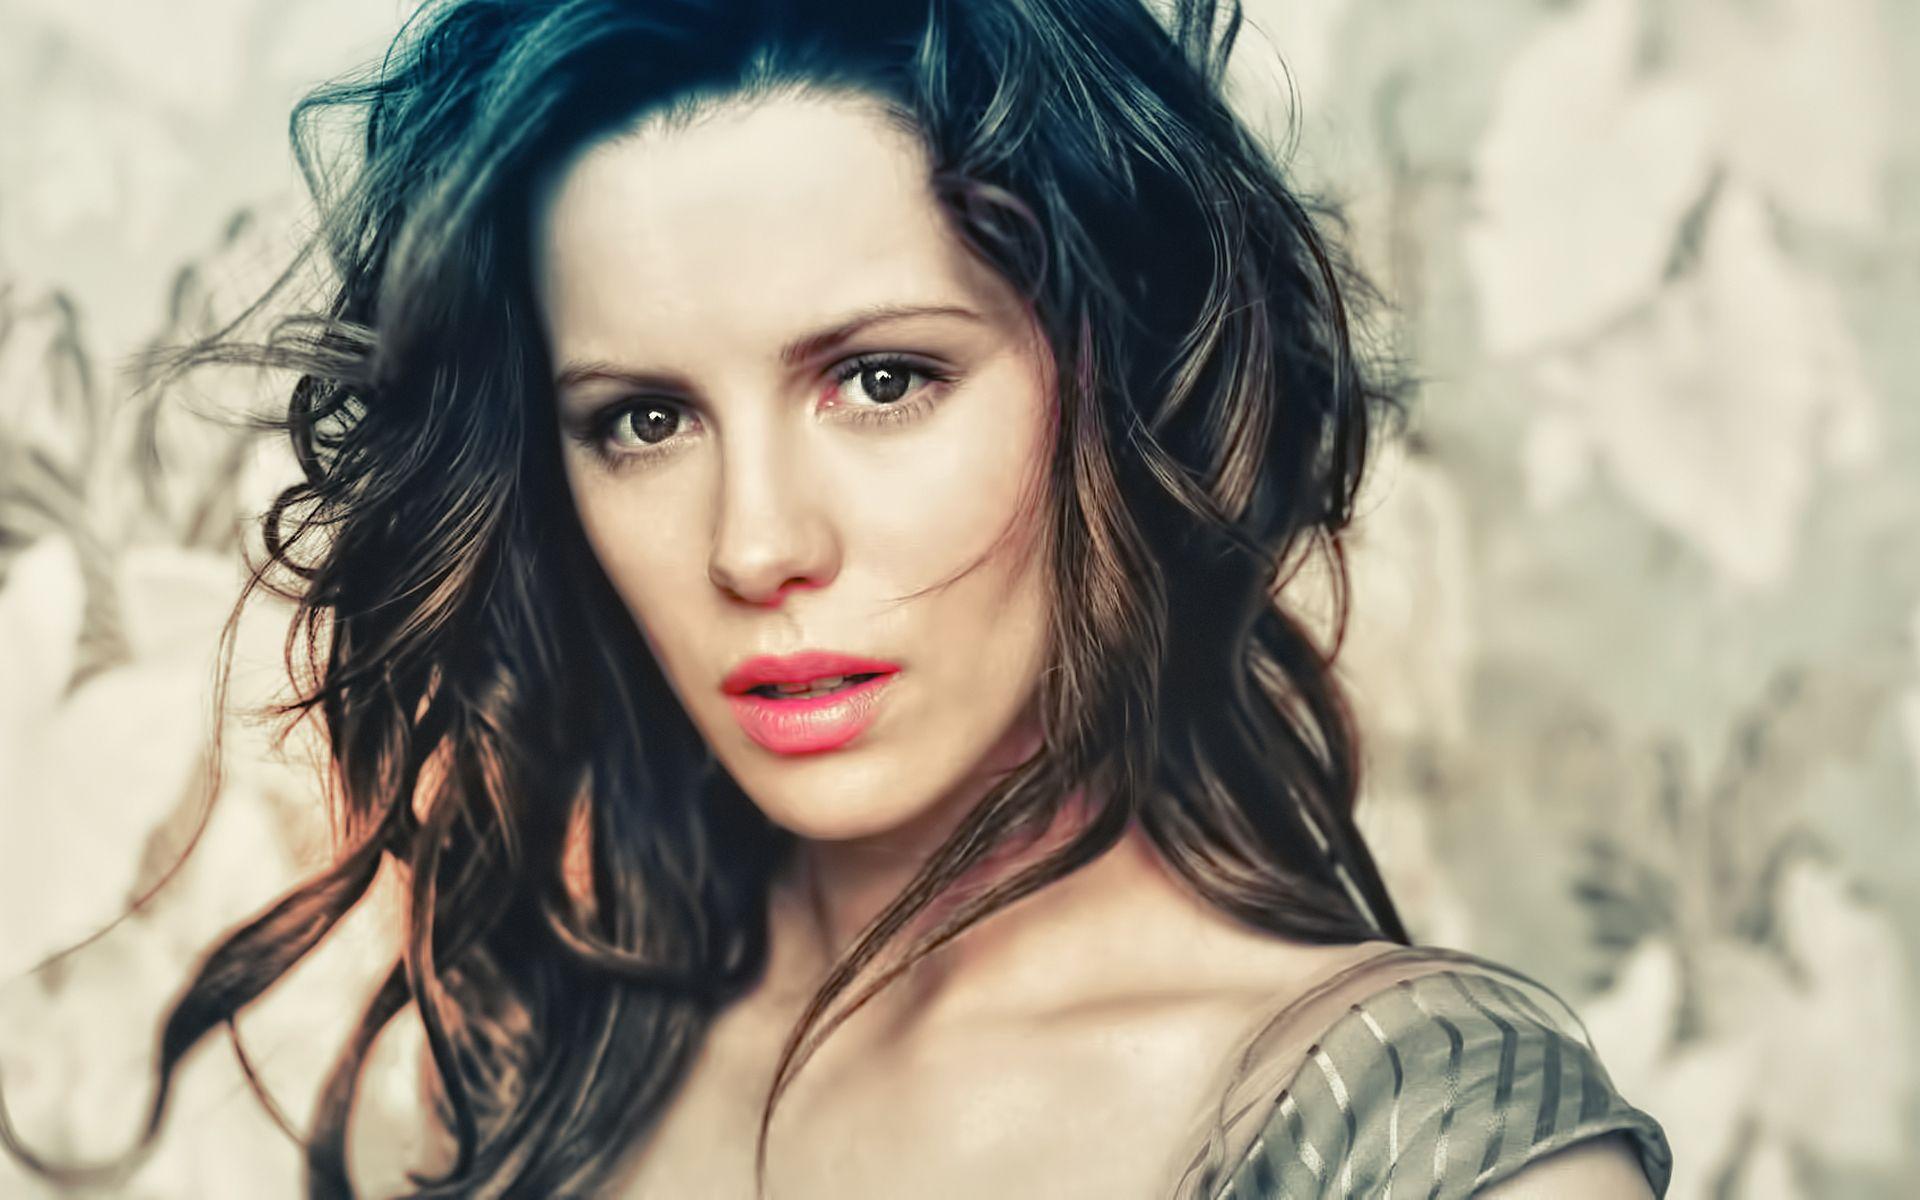 Kate Beckinsale Thinking Images Wallpapers